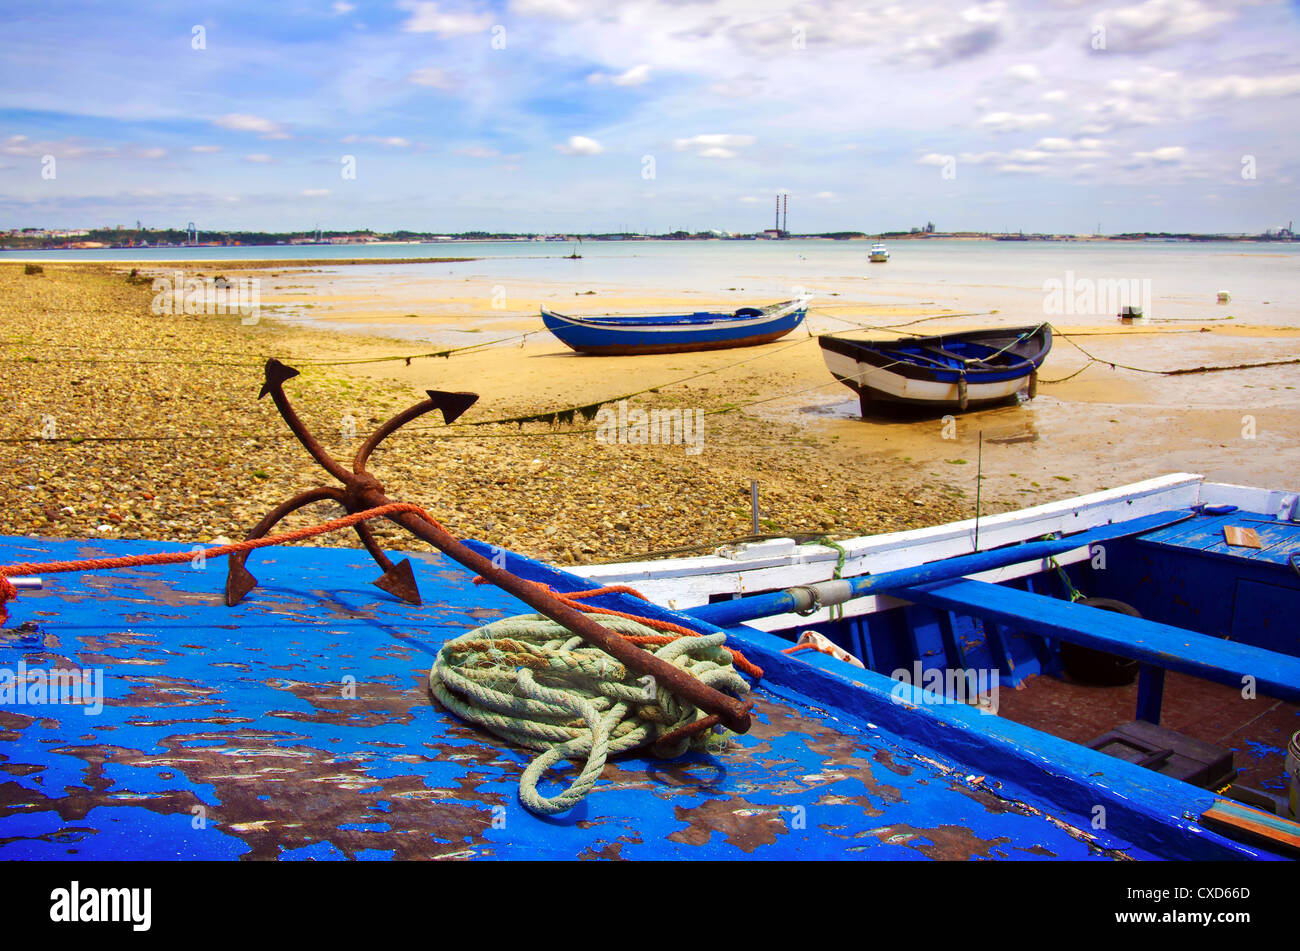 Old blue fishing boats in a beach and rusty anchor in the foreground Stock Photo